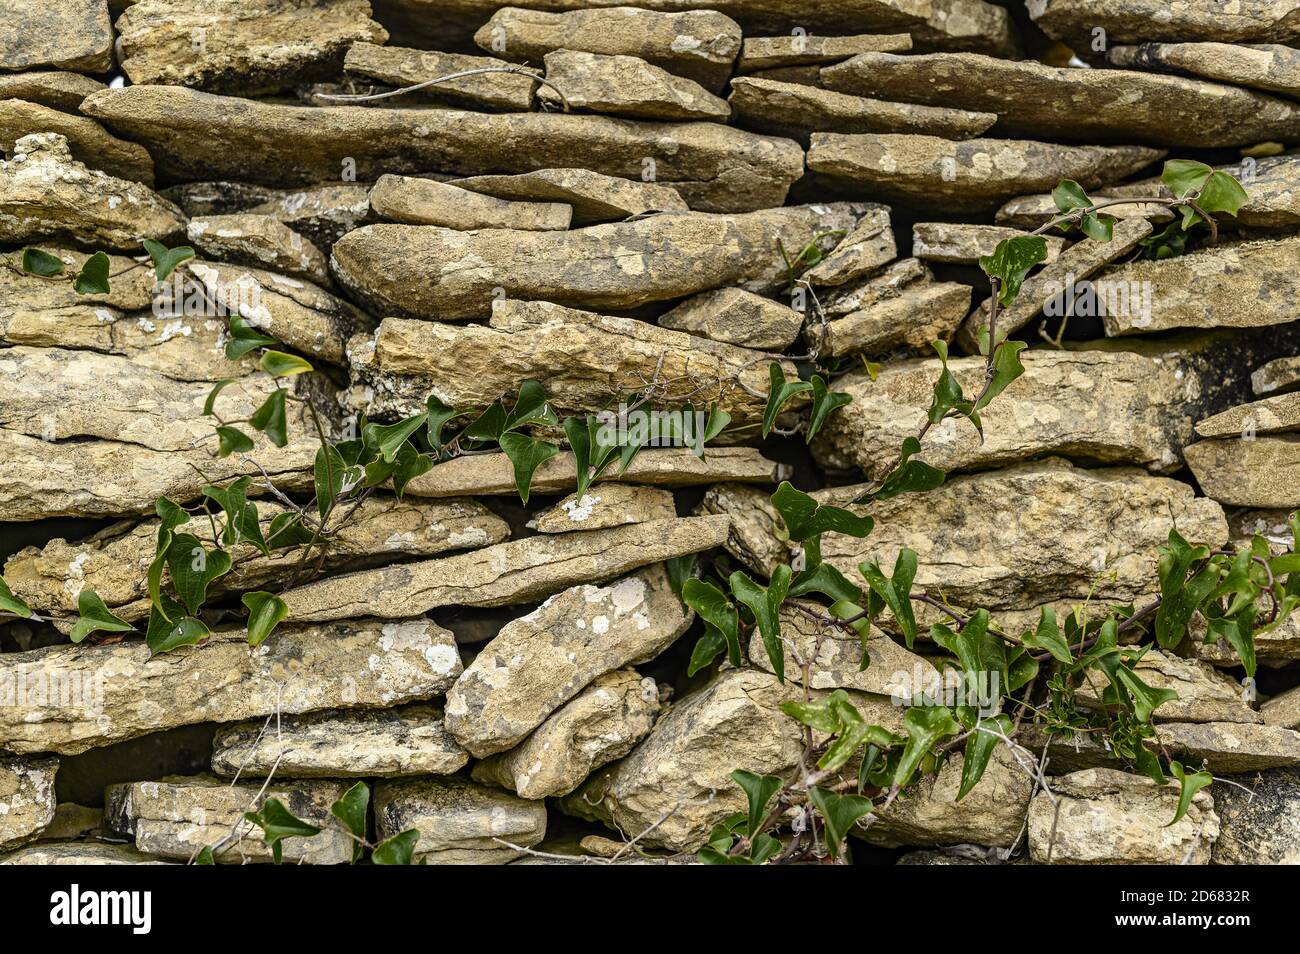 Closeup shot of stone wall background with green grasses Stock Photo